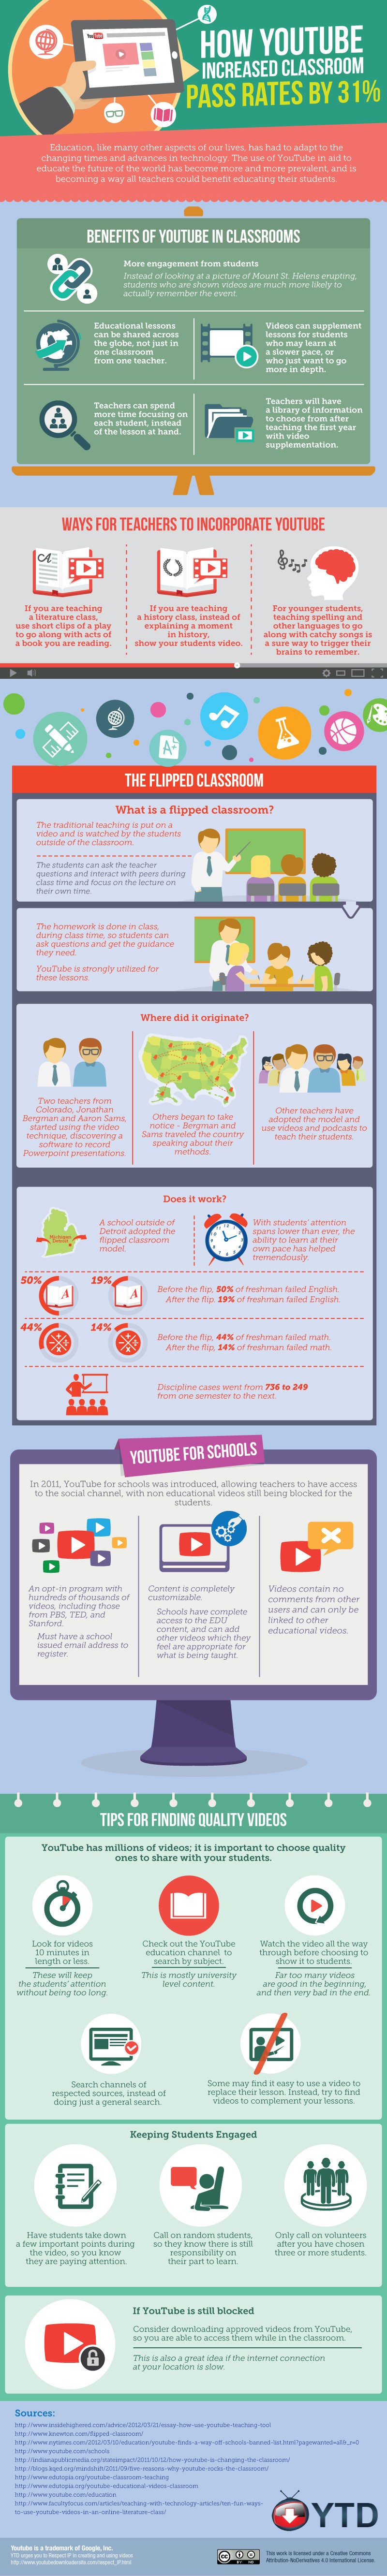 How YouTube Increases Classroom Pass Rates Infographic